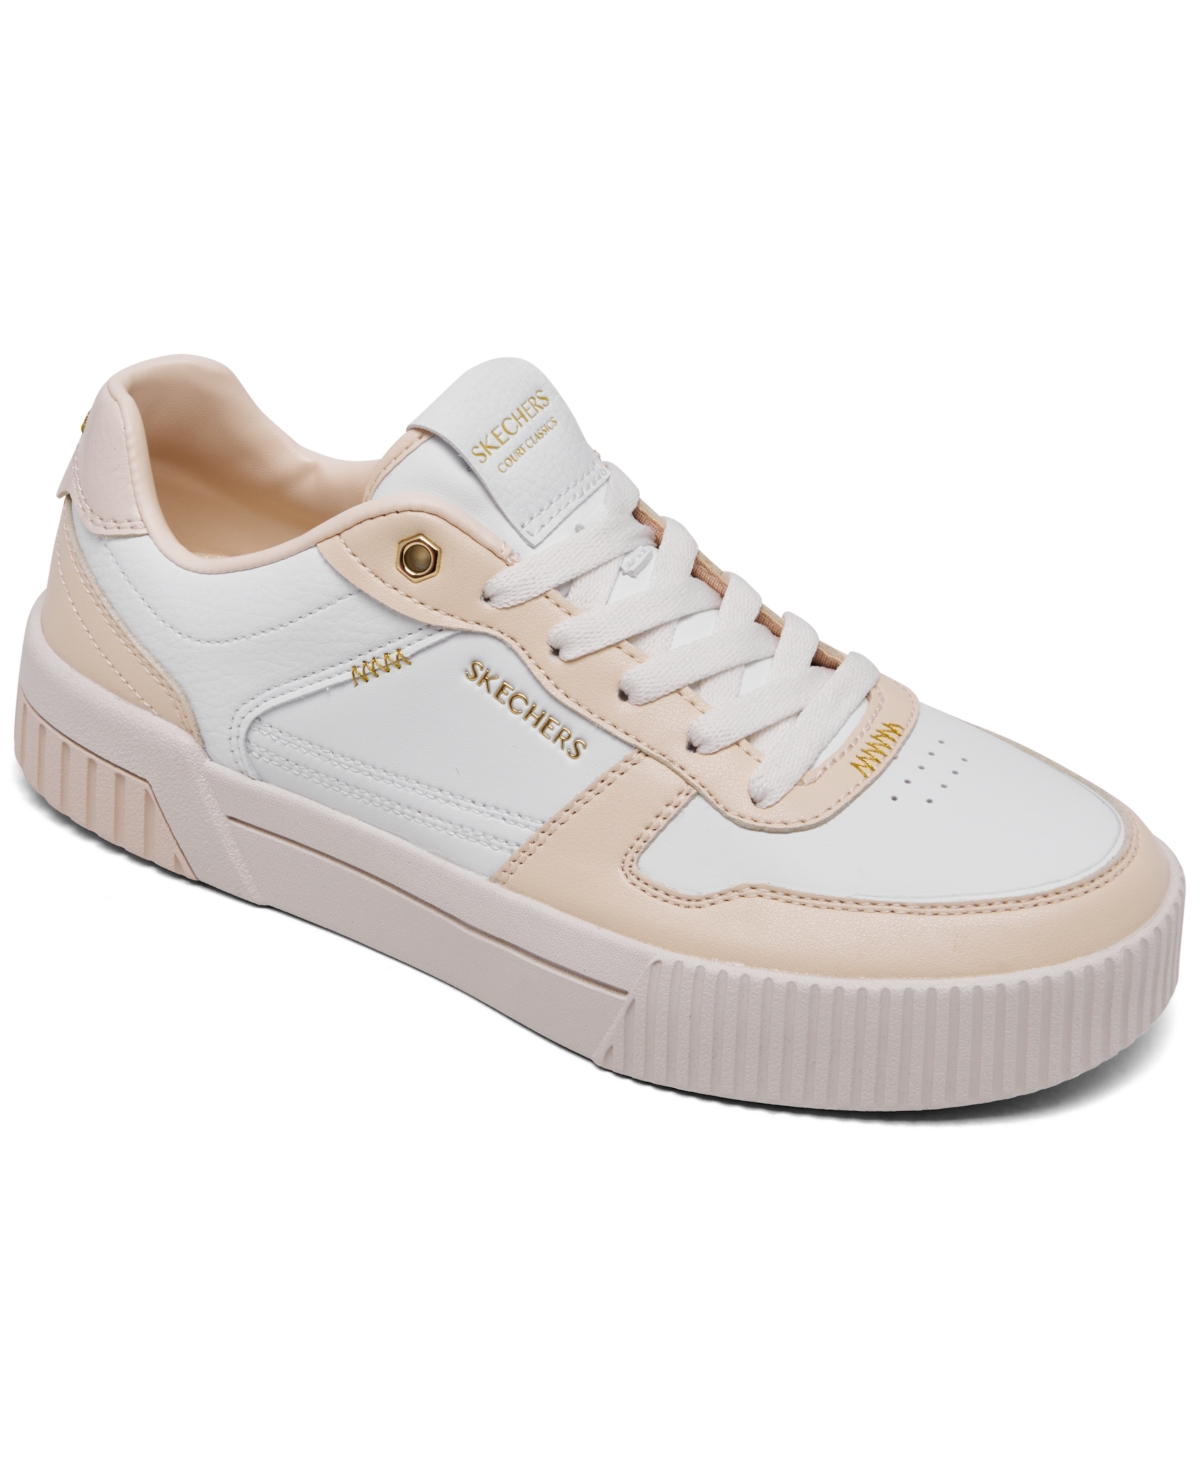 Women's Jade - Best In Class Casual Sneakers from Finish Line - White/pink